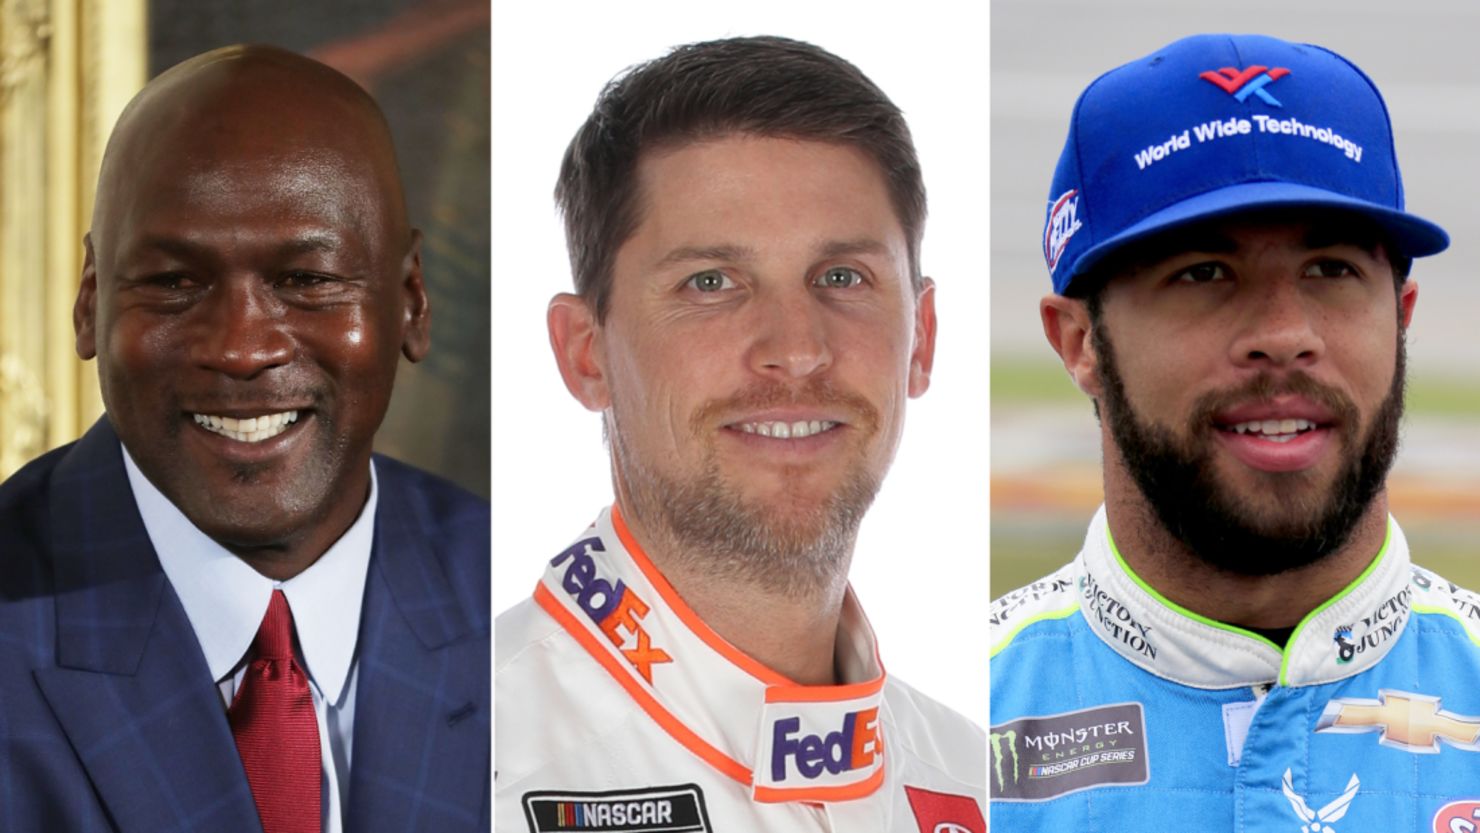 23XI Racing is co-owned by Michael Jordan, left, and NASCAR driver Denny Hamlin. The team's driver is Bubba Wallace, right.